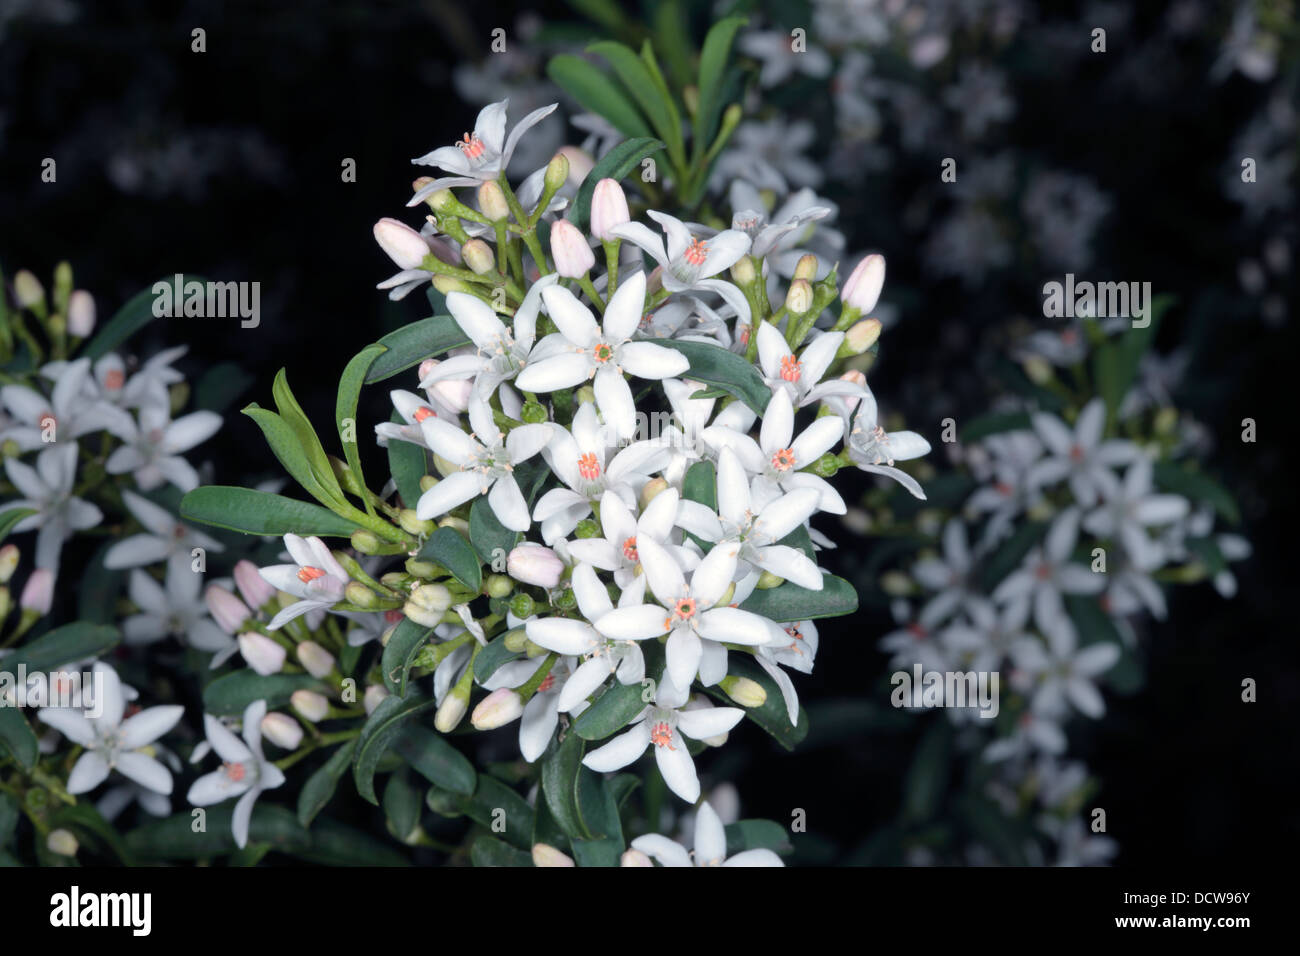 Close-up of Long-Leaf Wax-Flower/- Eriostemon myoporoides [Philotheca myoporoides]- Family Rutaceae Stock Photo